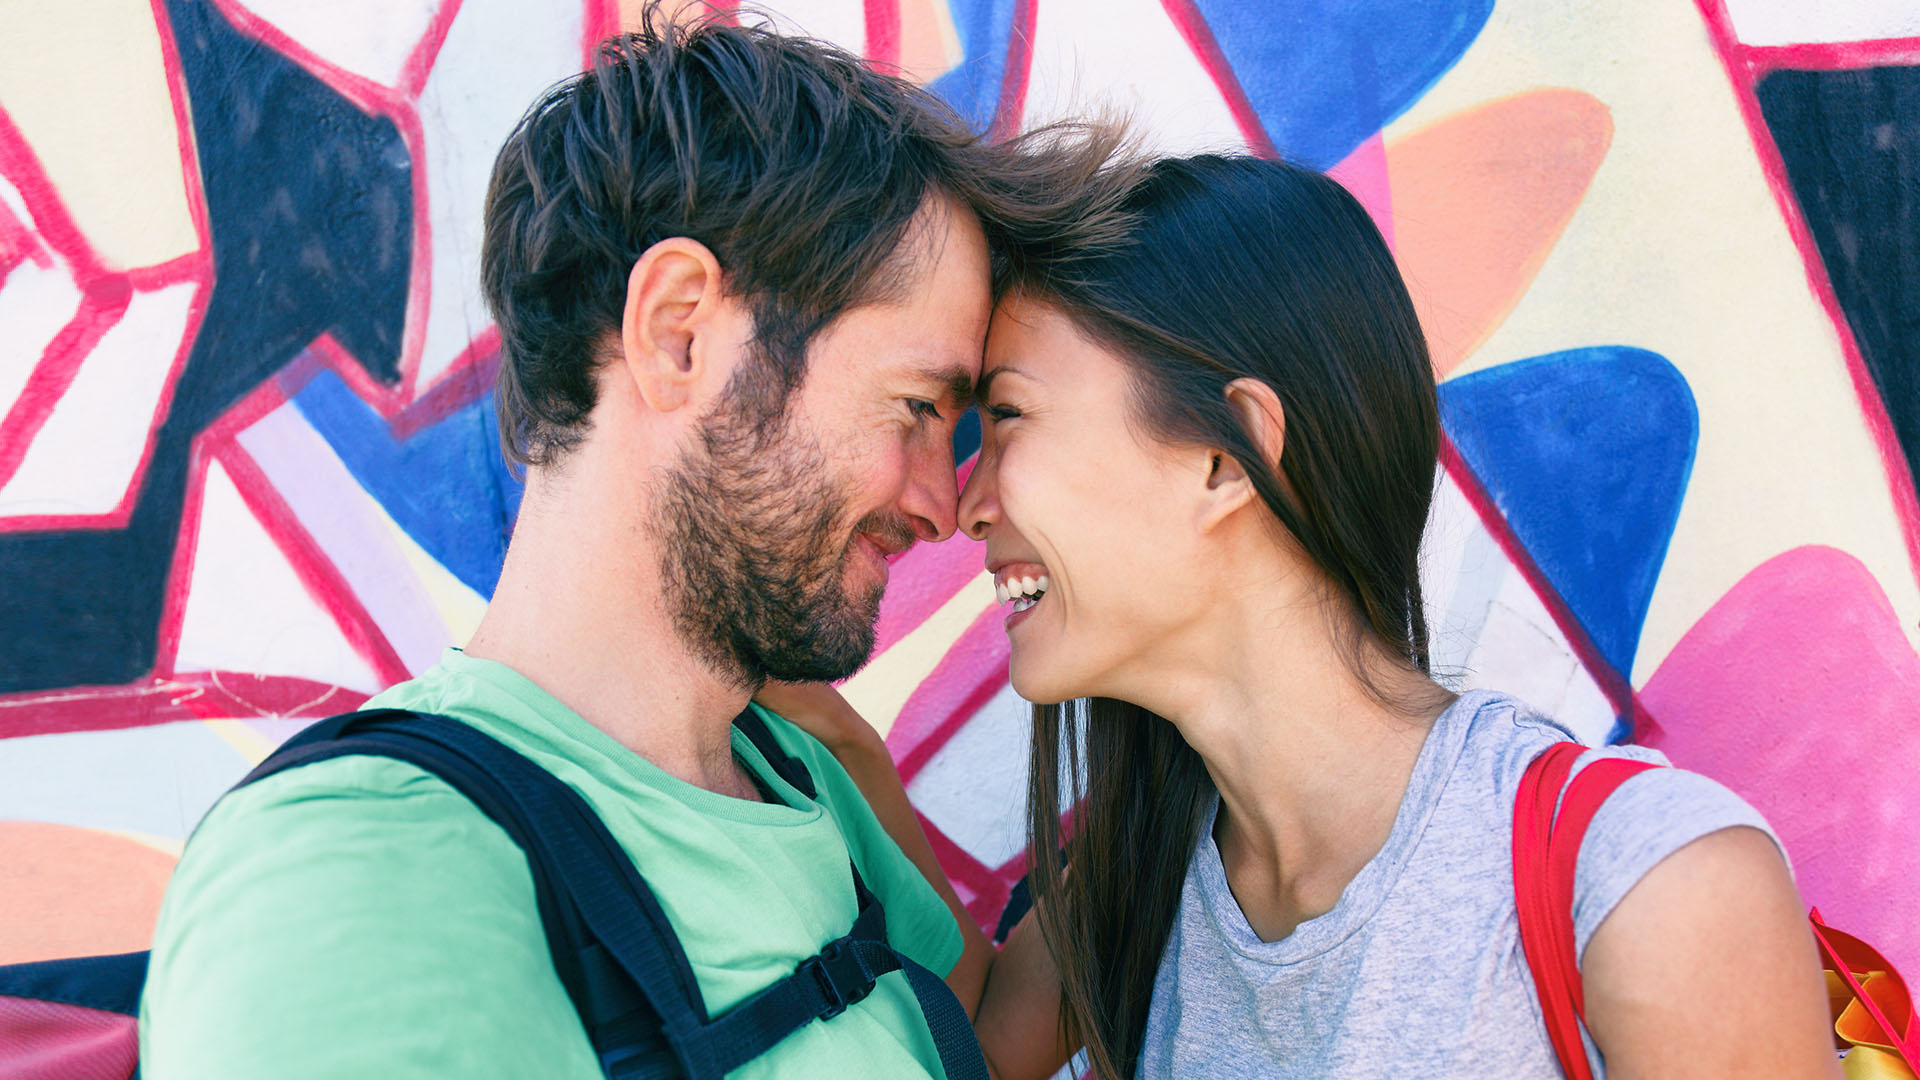 Brunette Asian woman and man in front of graffiti wall, touching their foreheads together while laughing together.